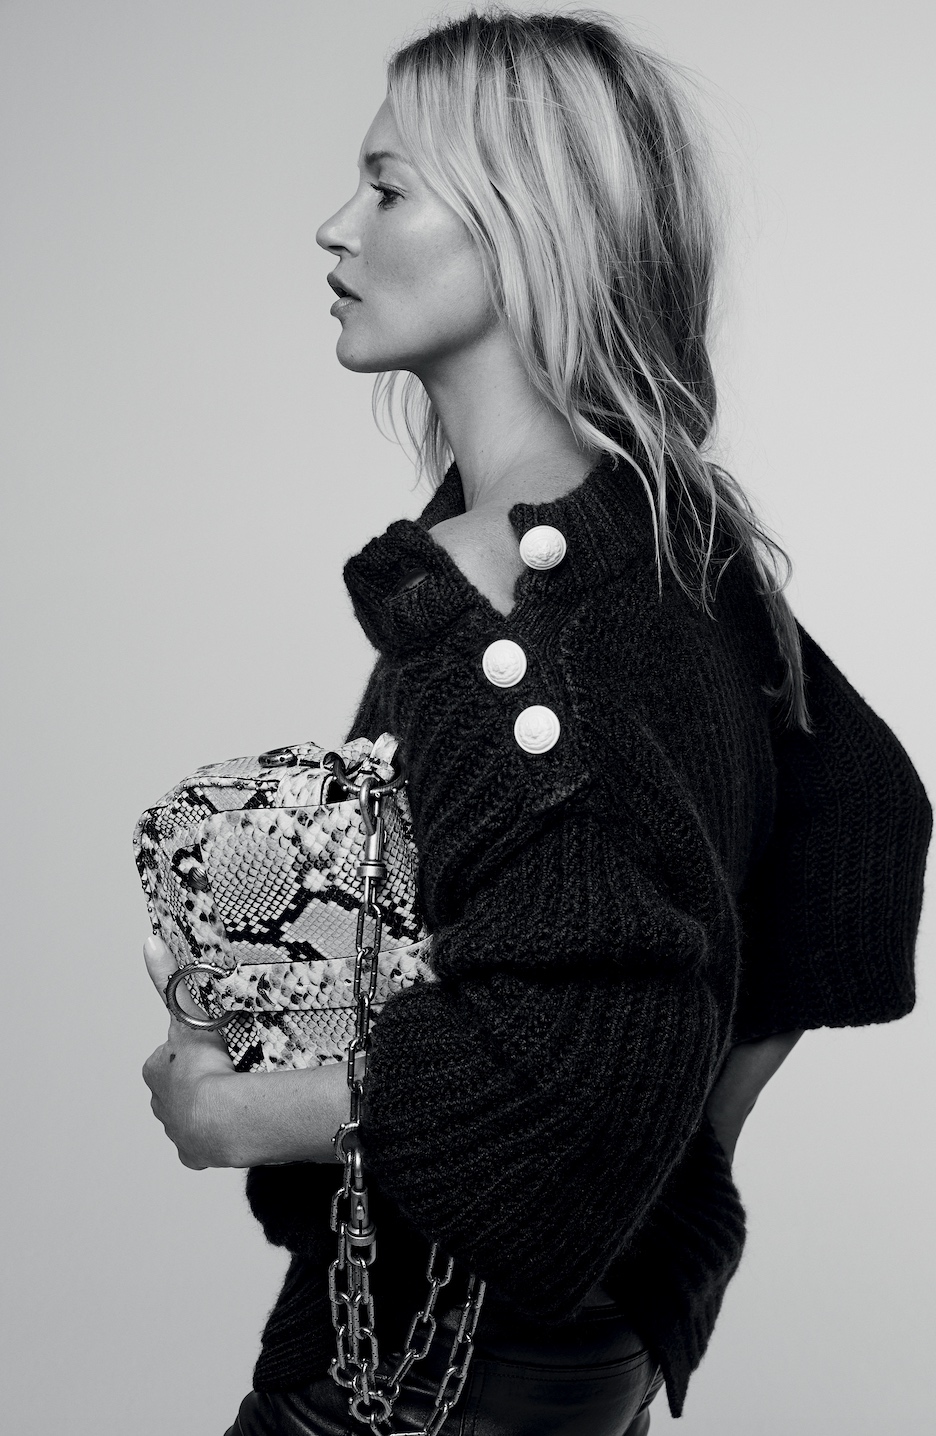 Woman with long straight blonde hair with highlights and middle part wearing black leather pants and a large knit oversized sweater with large gold buttons on shoulder partially open with hand on hips holding square shoulder bag in brown python print with chain shoulder strap in front of a white background